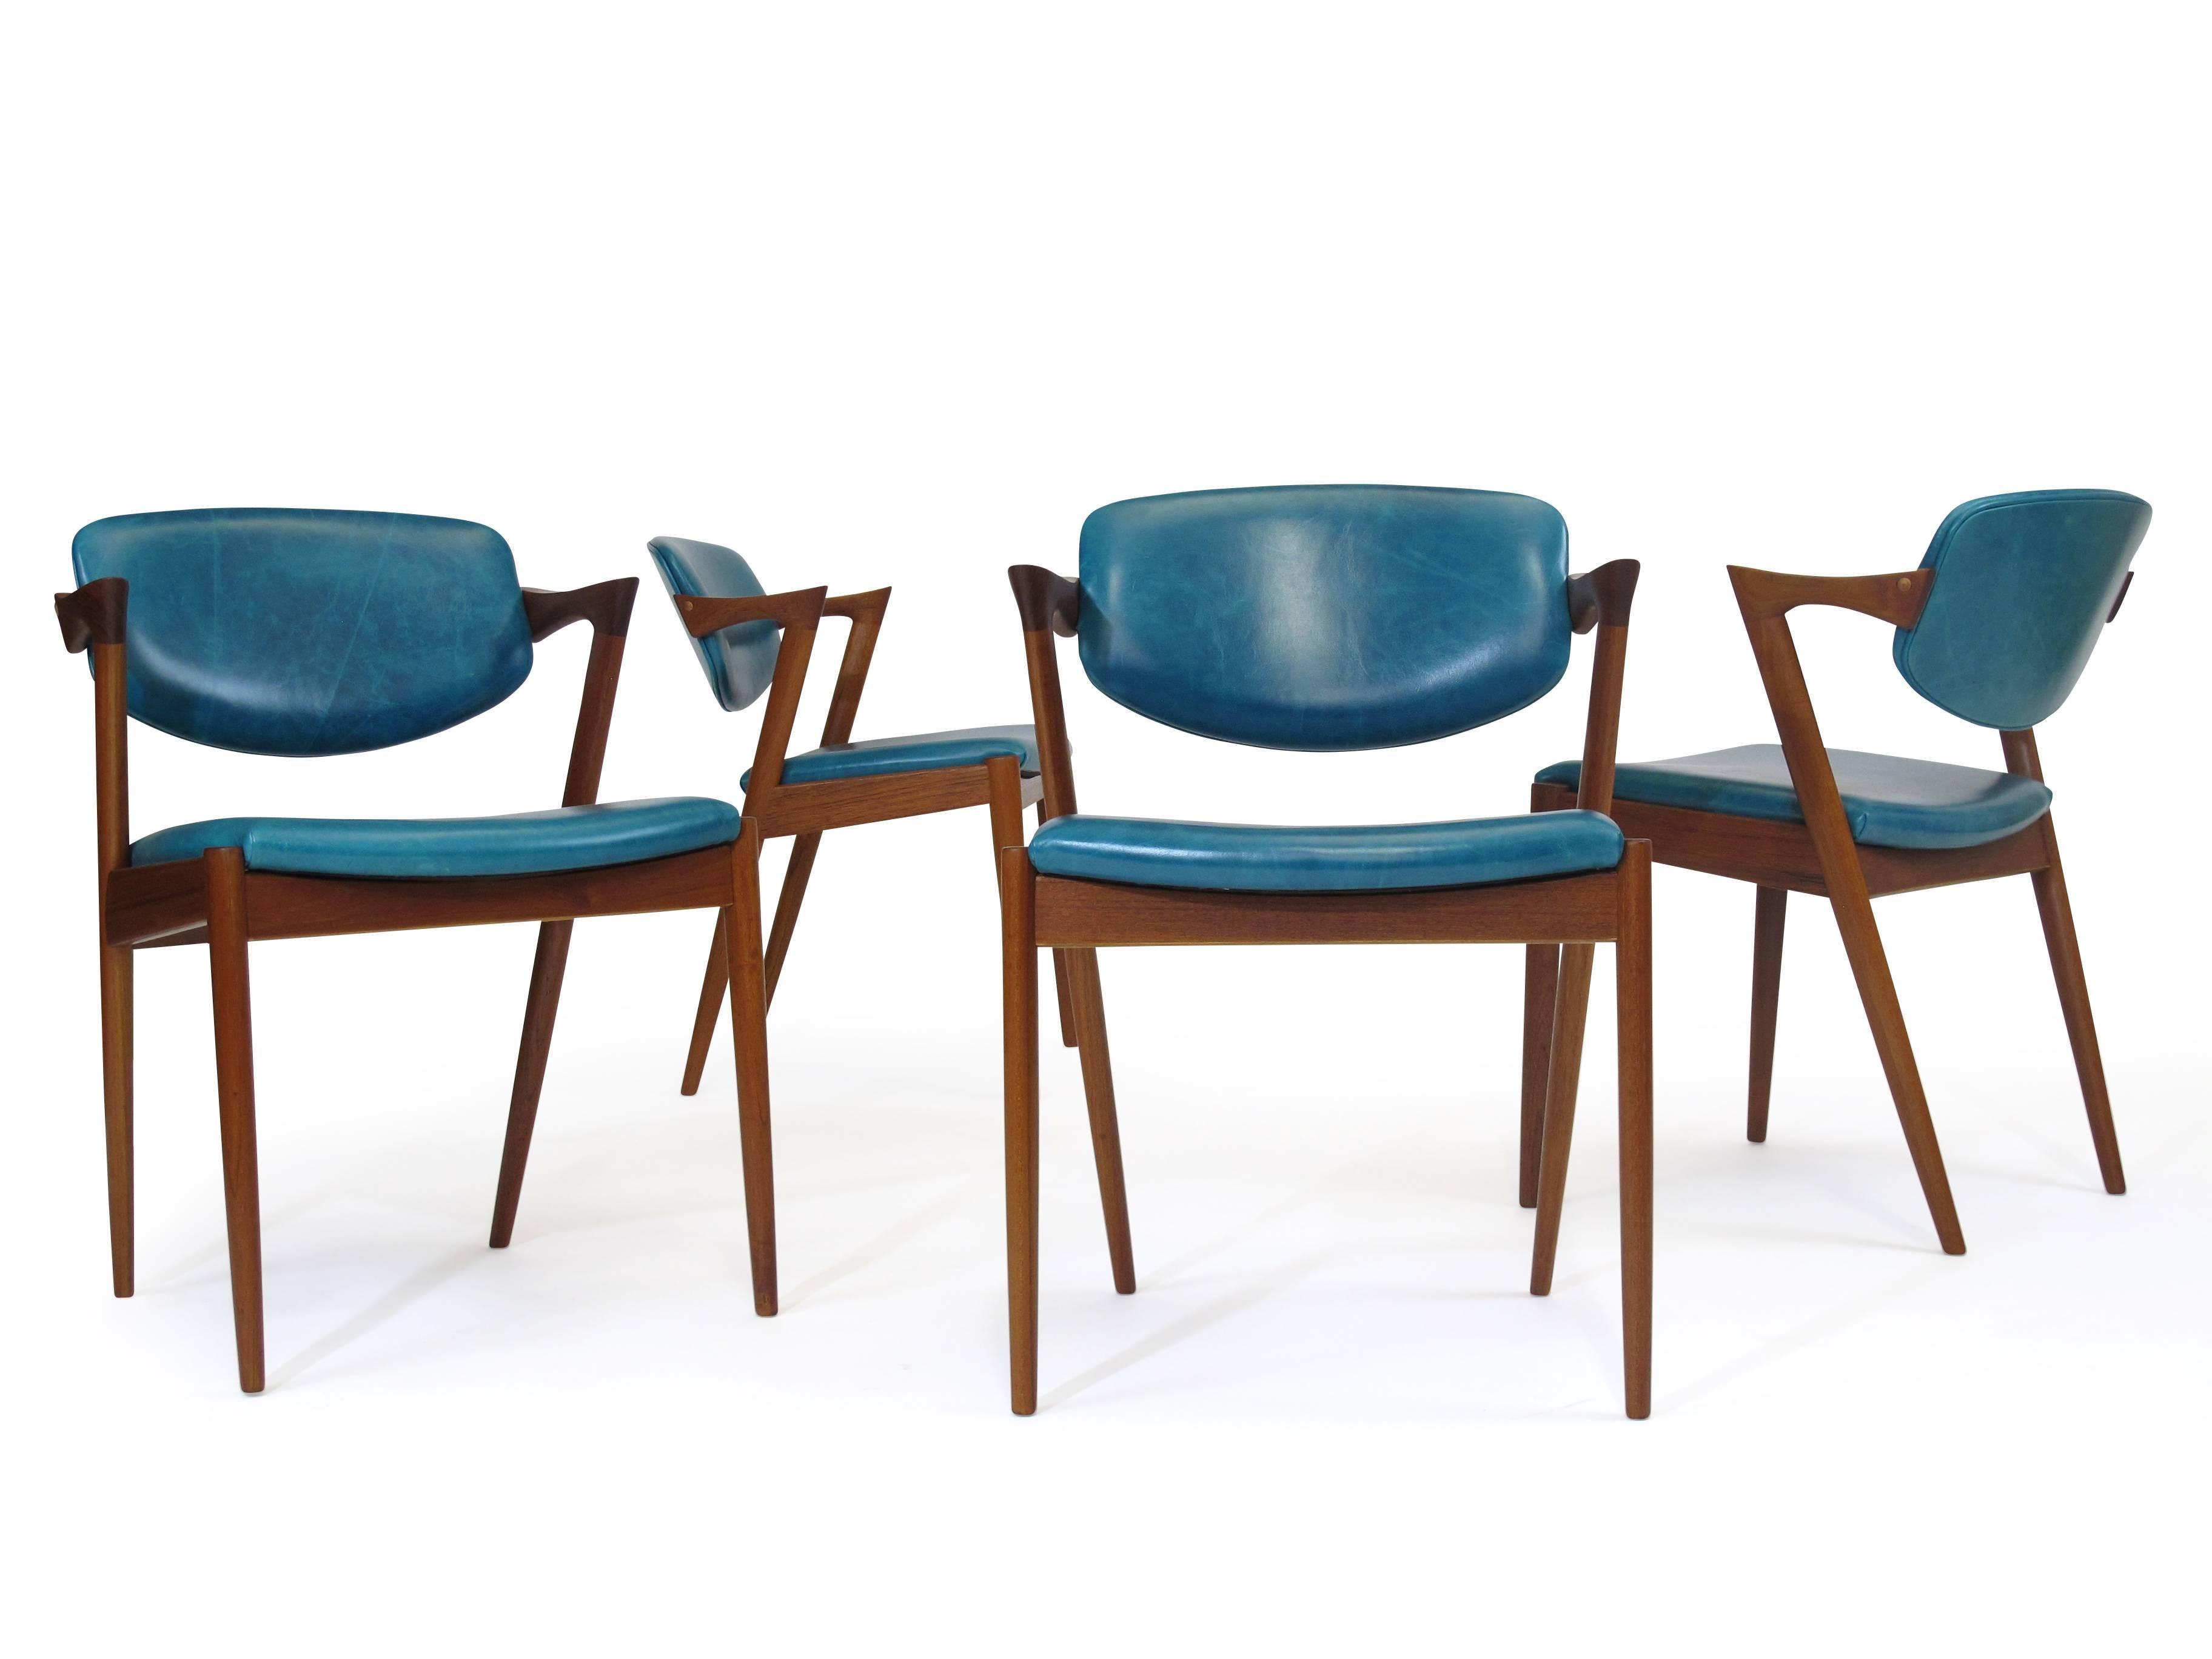 Six Kai Kristiansen model 42 teak dining chairs manufactured by V. Schou Andersen, circa 1964. The chairs features solid teak frames with tilt back rests and angles arms. The chairs have been professionally restored and upholstered in top-quality